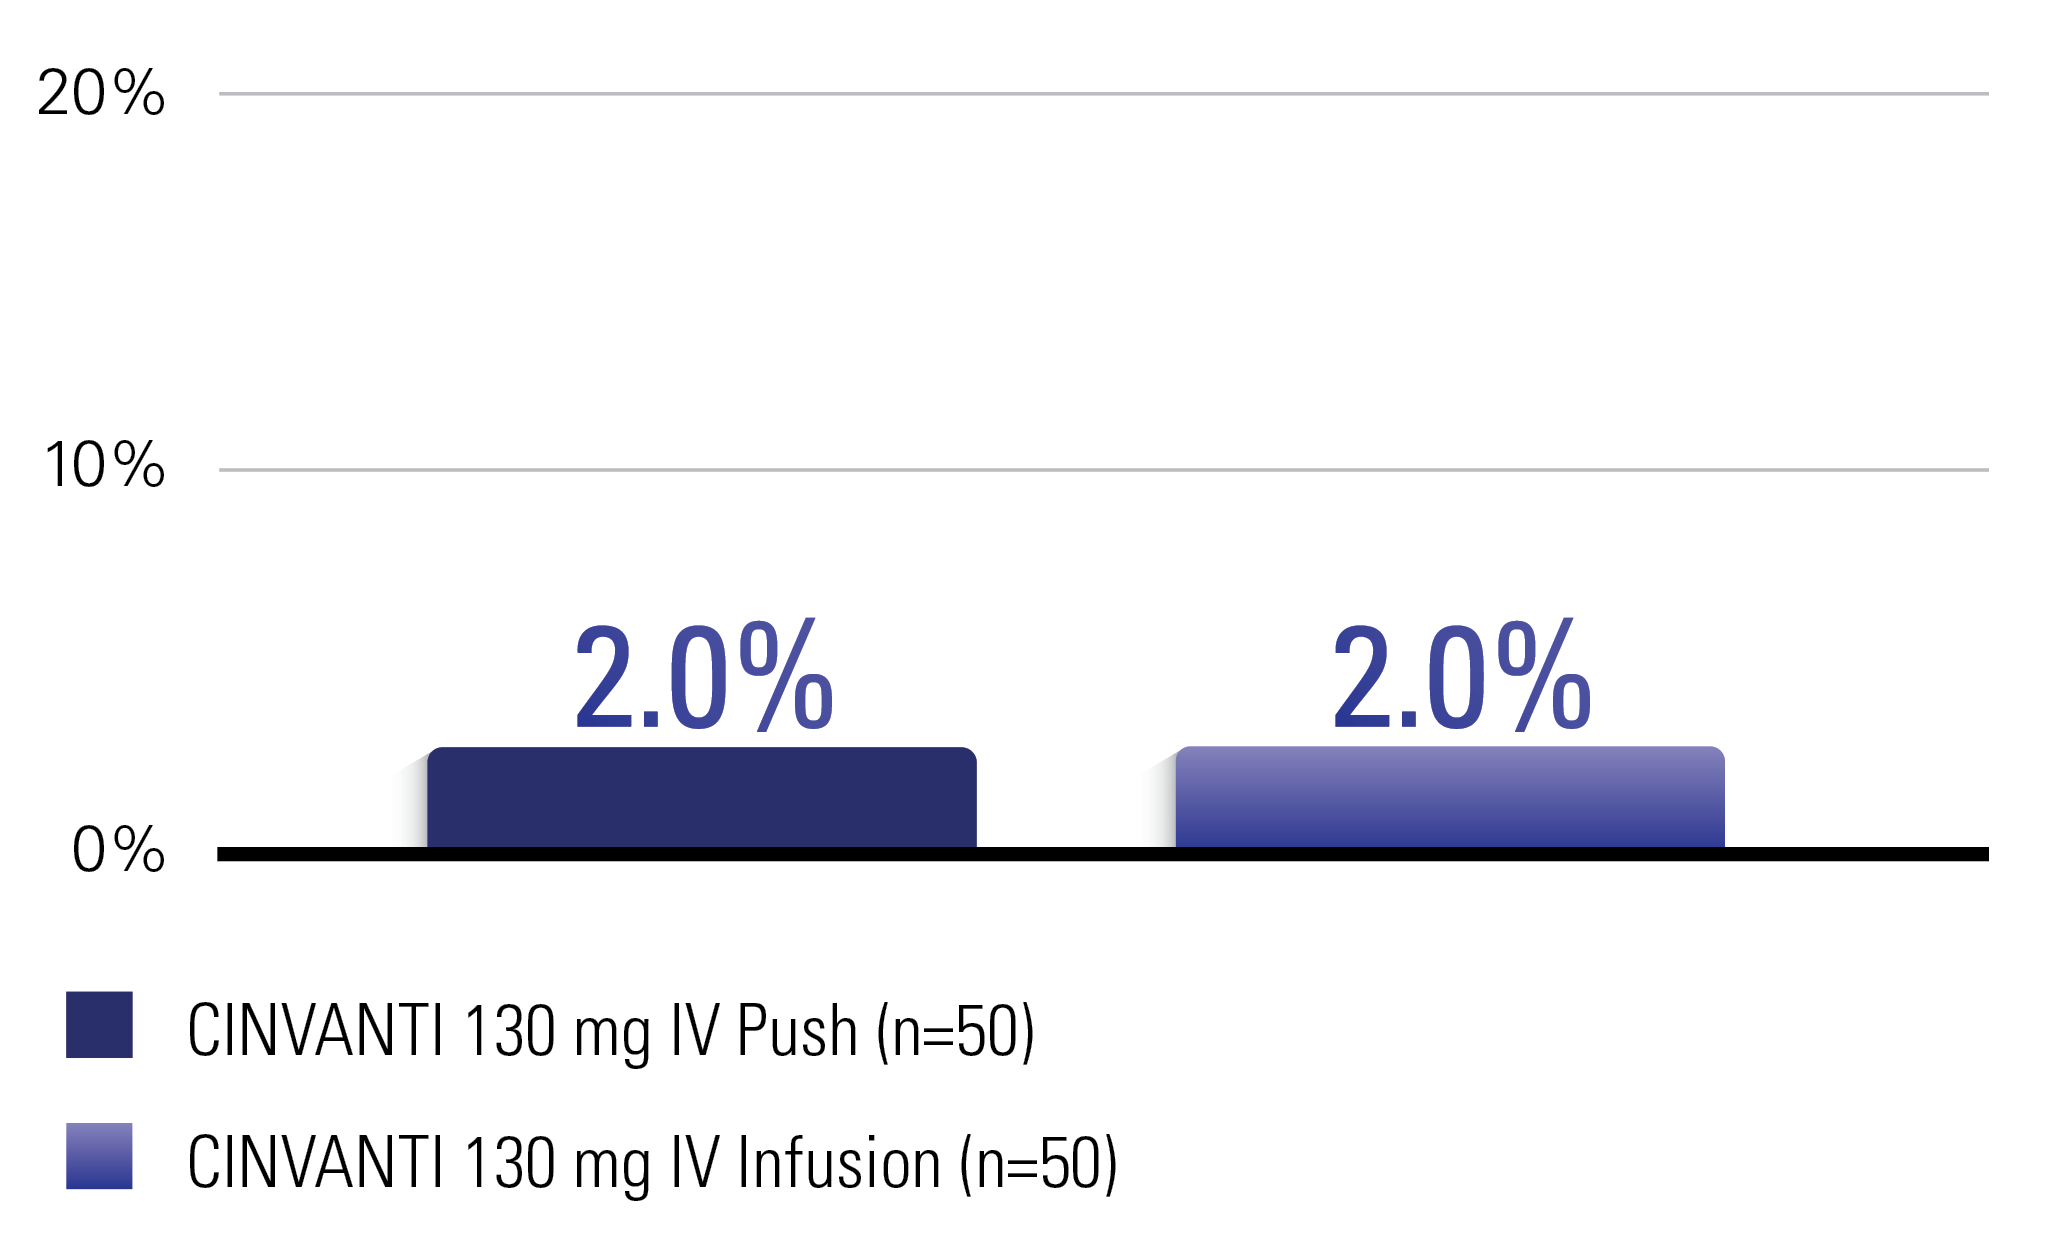 Graph demonstrating that the incidence of TEAEs within the first 30 minutes with CINVANTI IV Push was equal to CINVANTI infusion at a rate of 2%